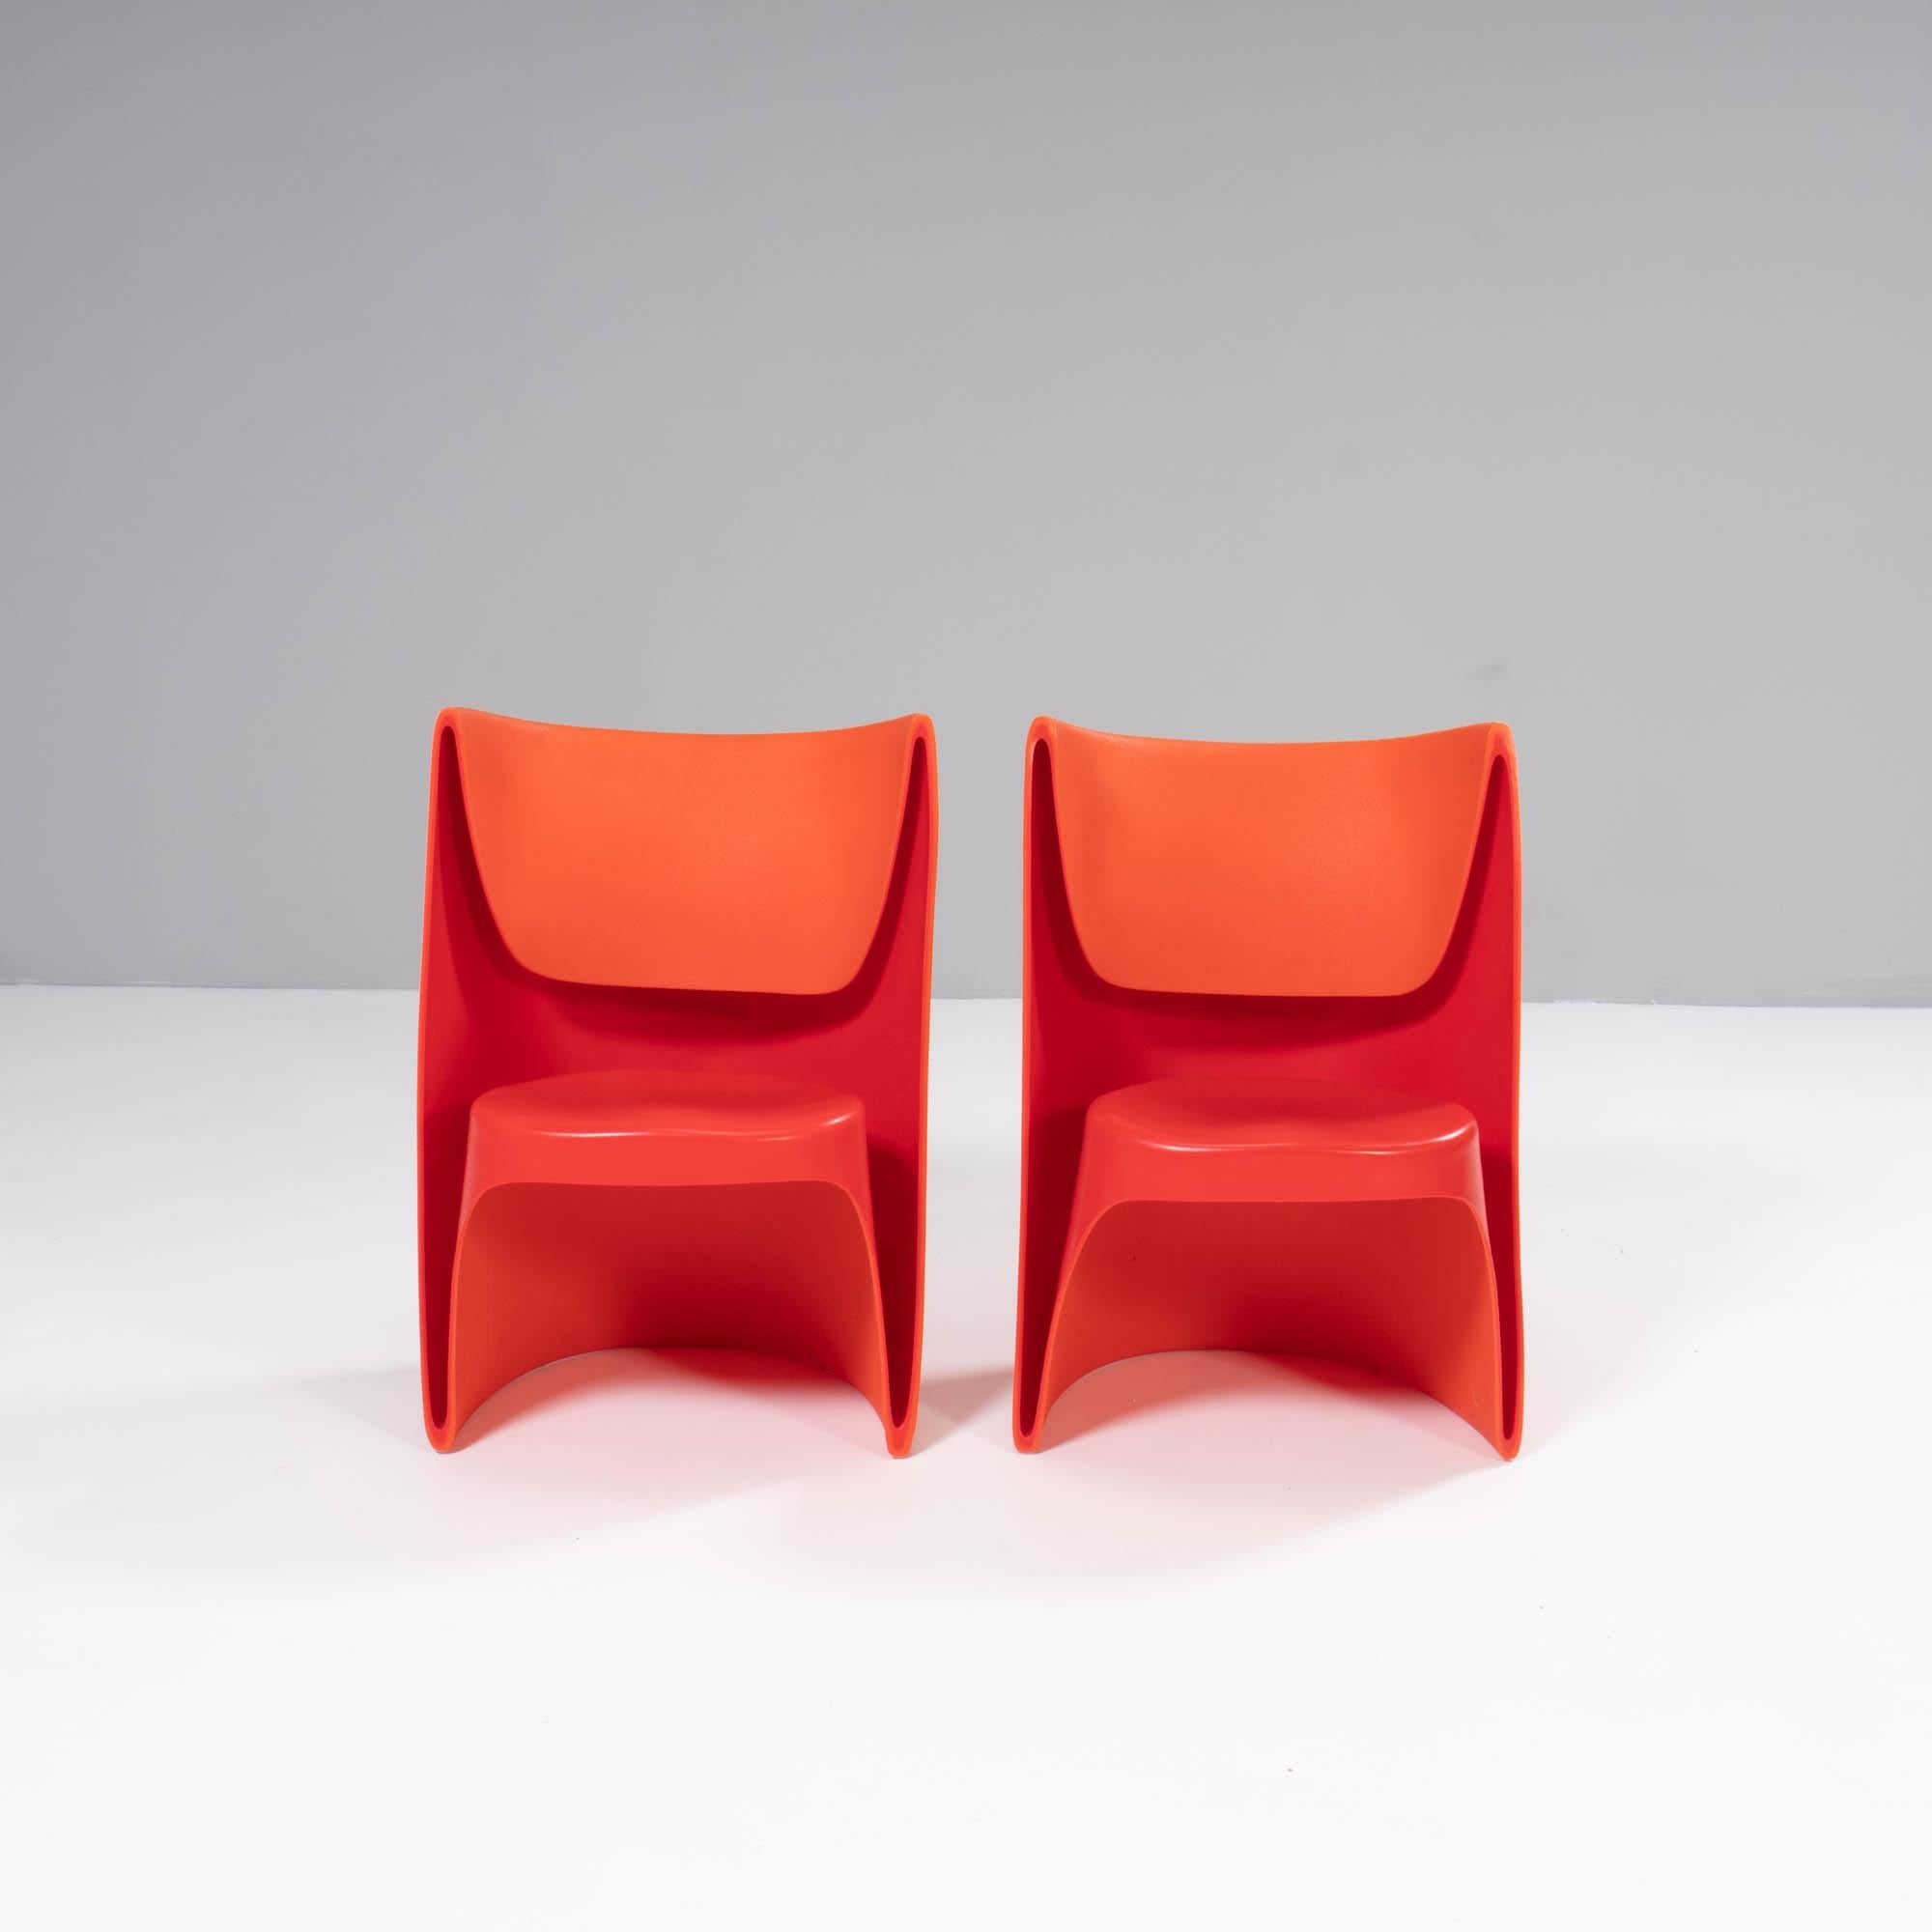 Designed by Ron Arad for Cappellini in 2002, the ‘Nona Rota’ chair is the taller version of the ‘Nino Rota’ 

Constructed from twin walled moulded orange plastic, the chairs have a rounded silhouette with a textured outer shell and smooth interior